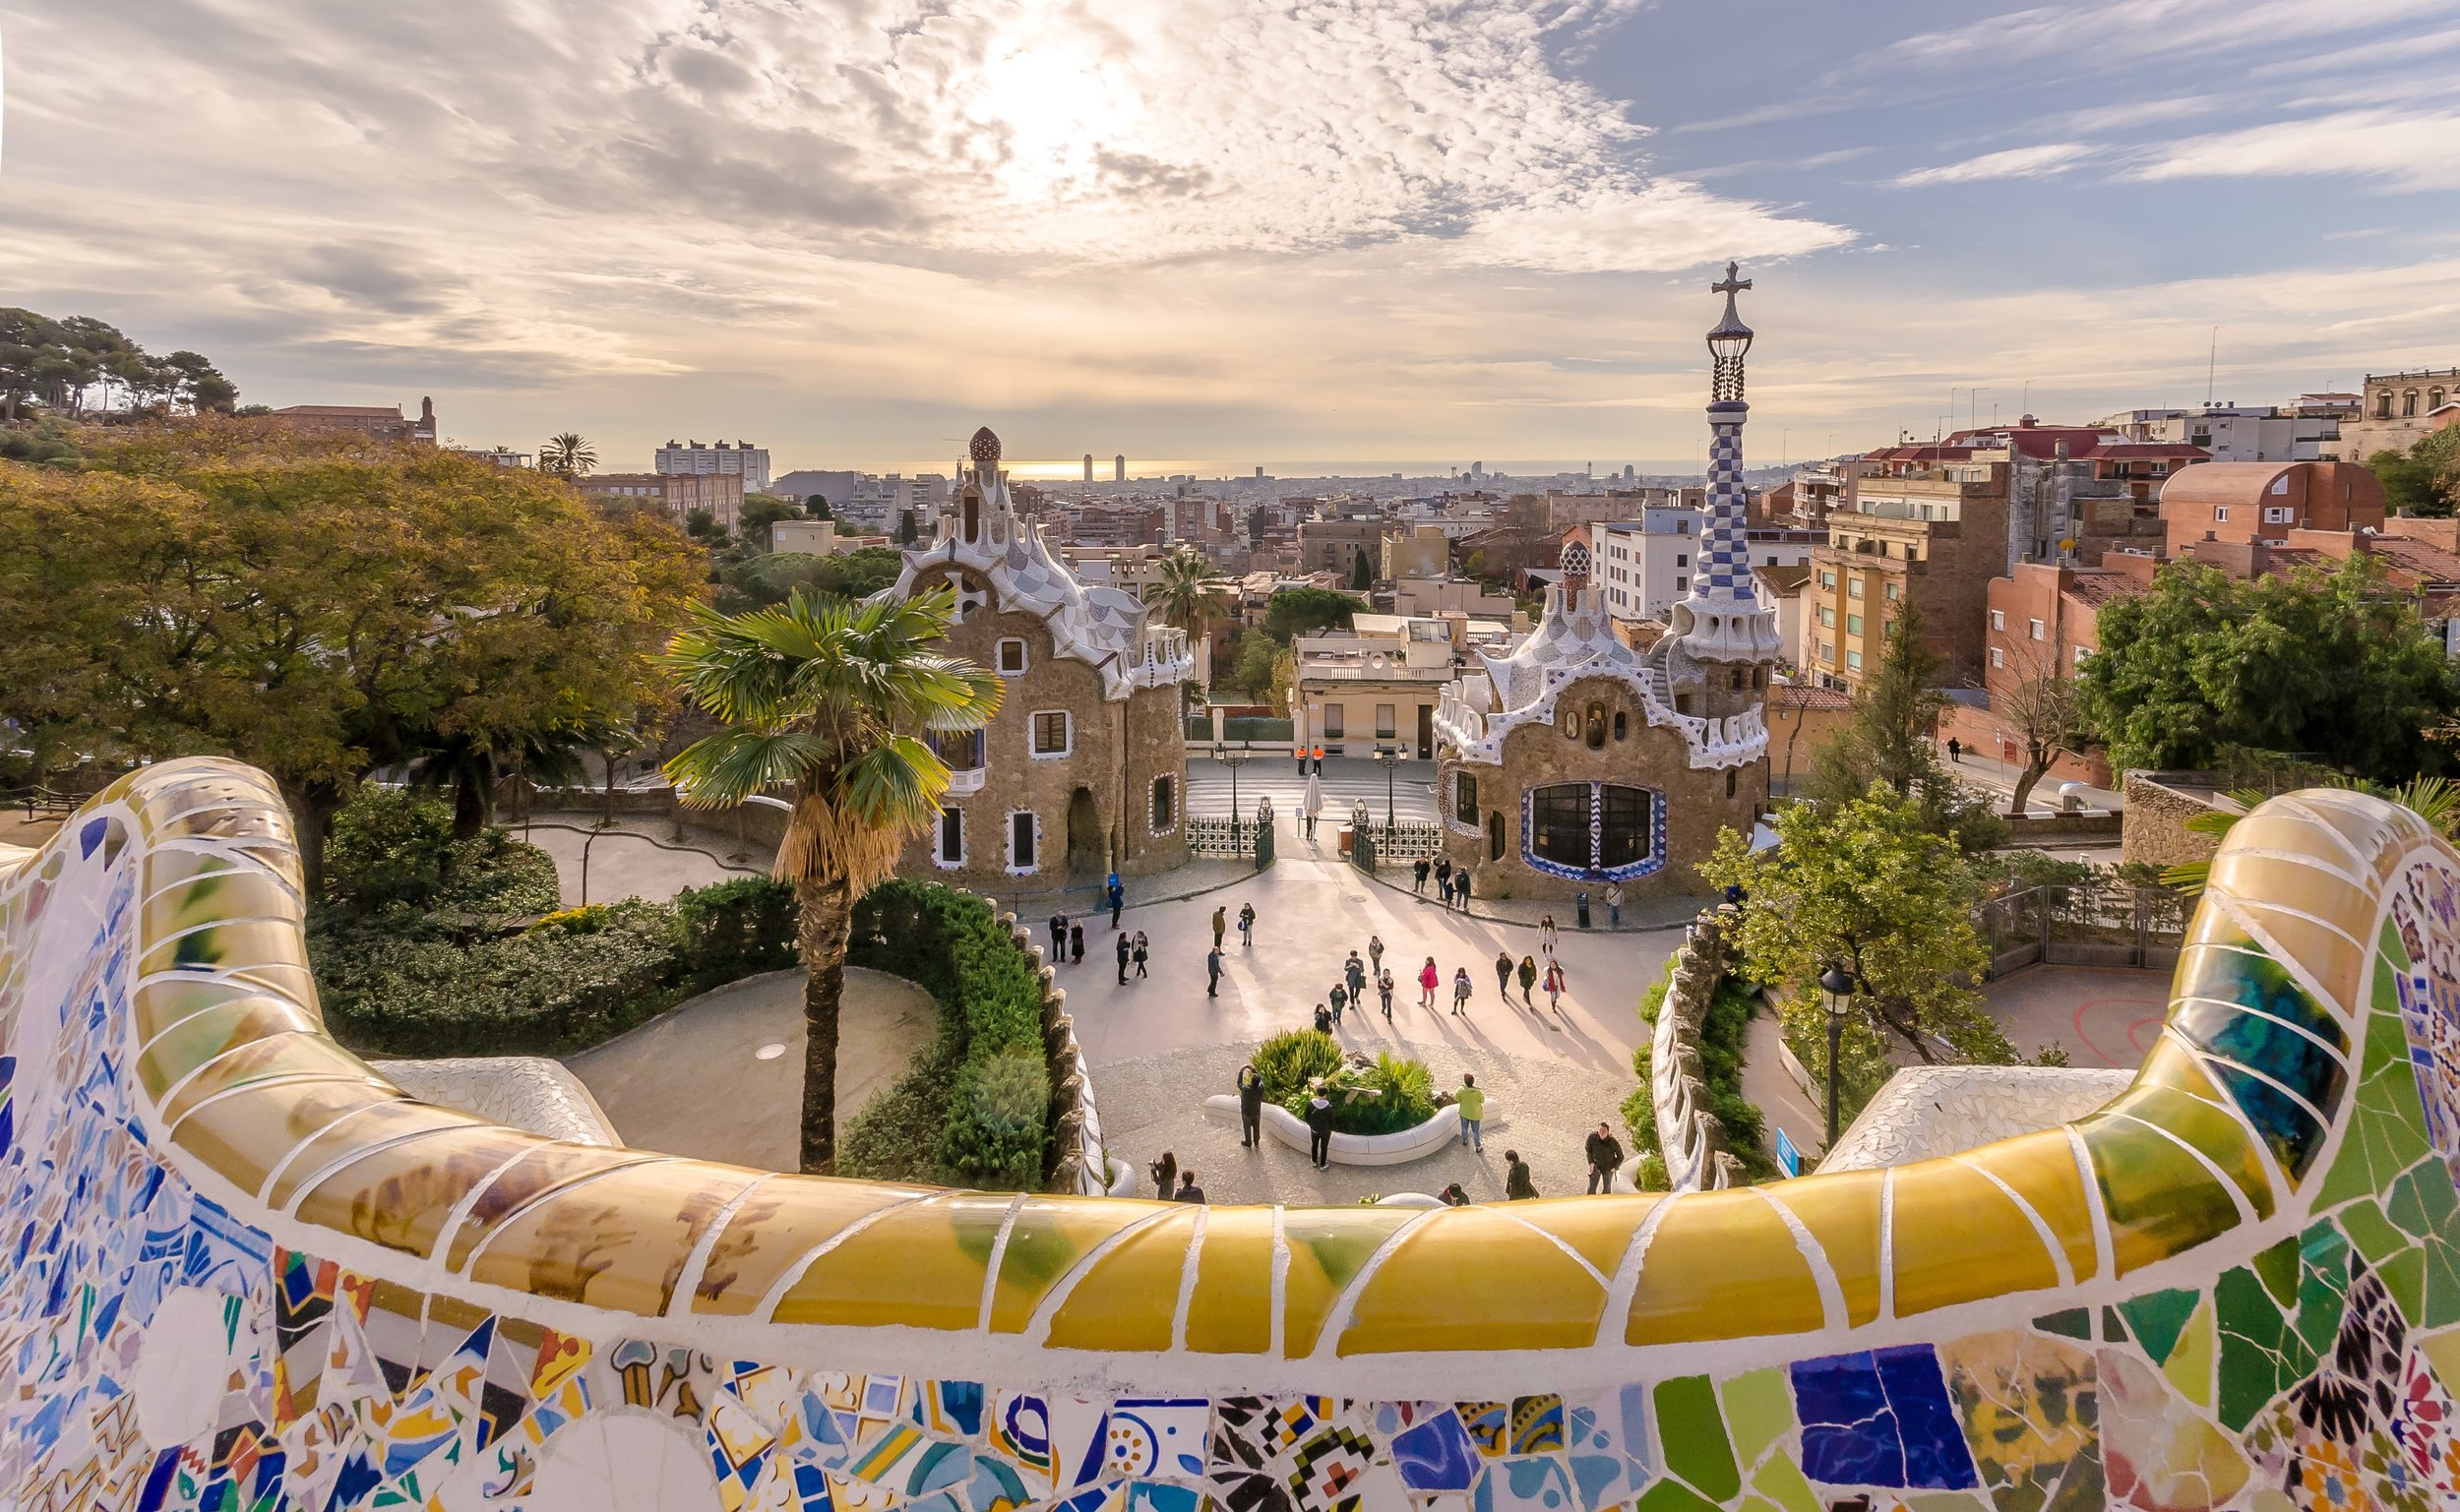 Park-Guell-in-Barcelona,-Spain.-519154984_3500x2152 (Small).jpeg